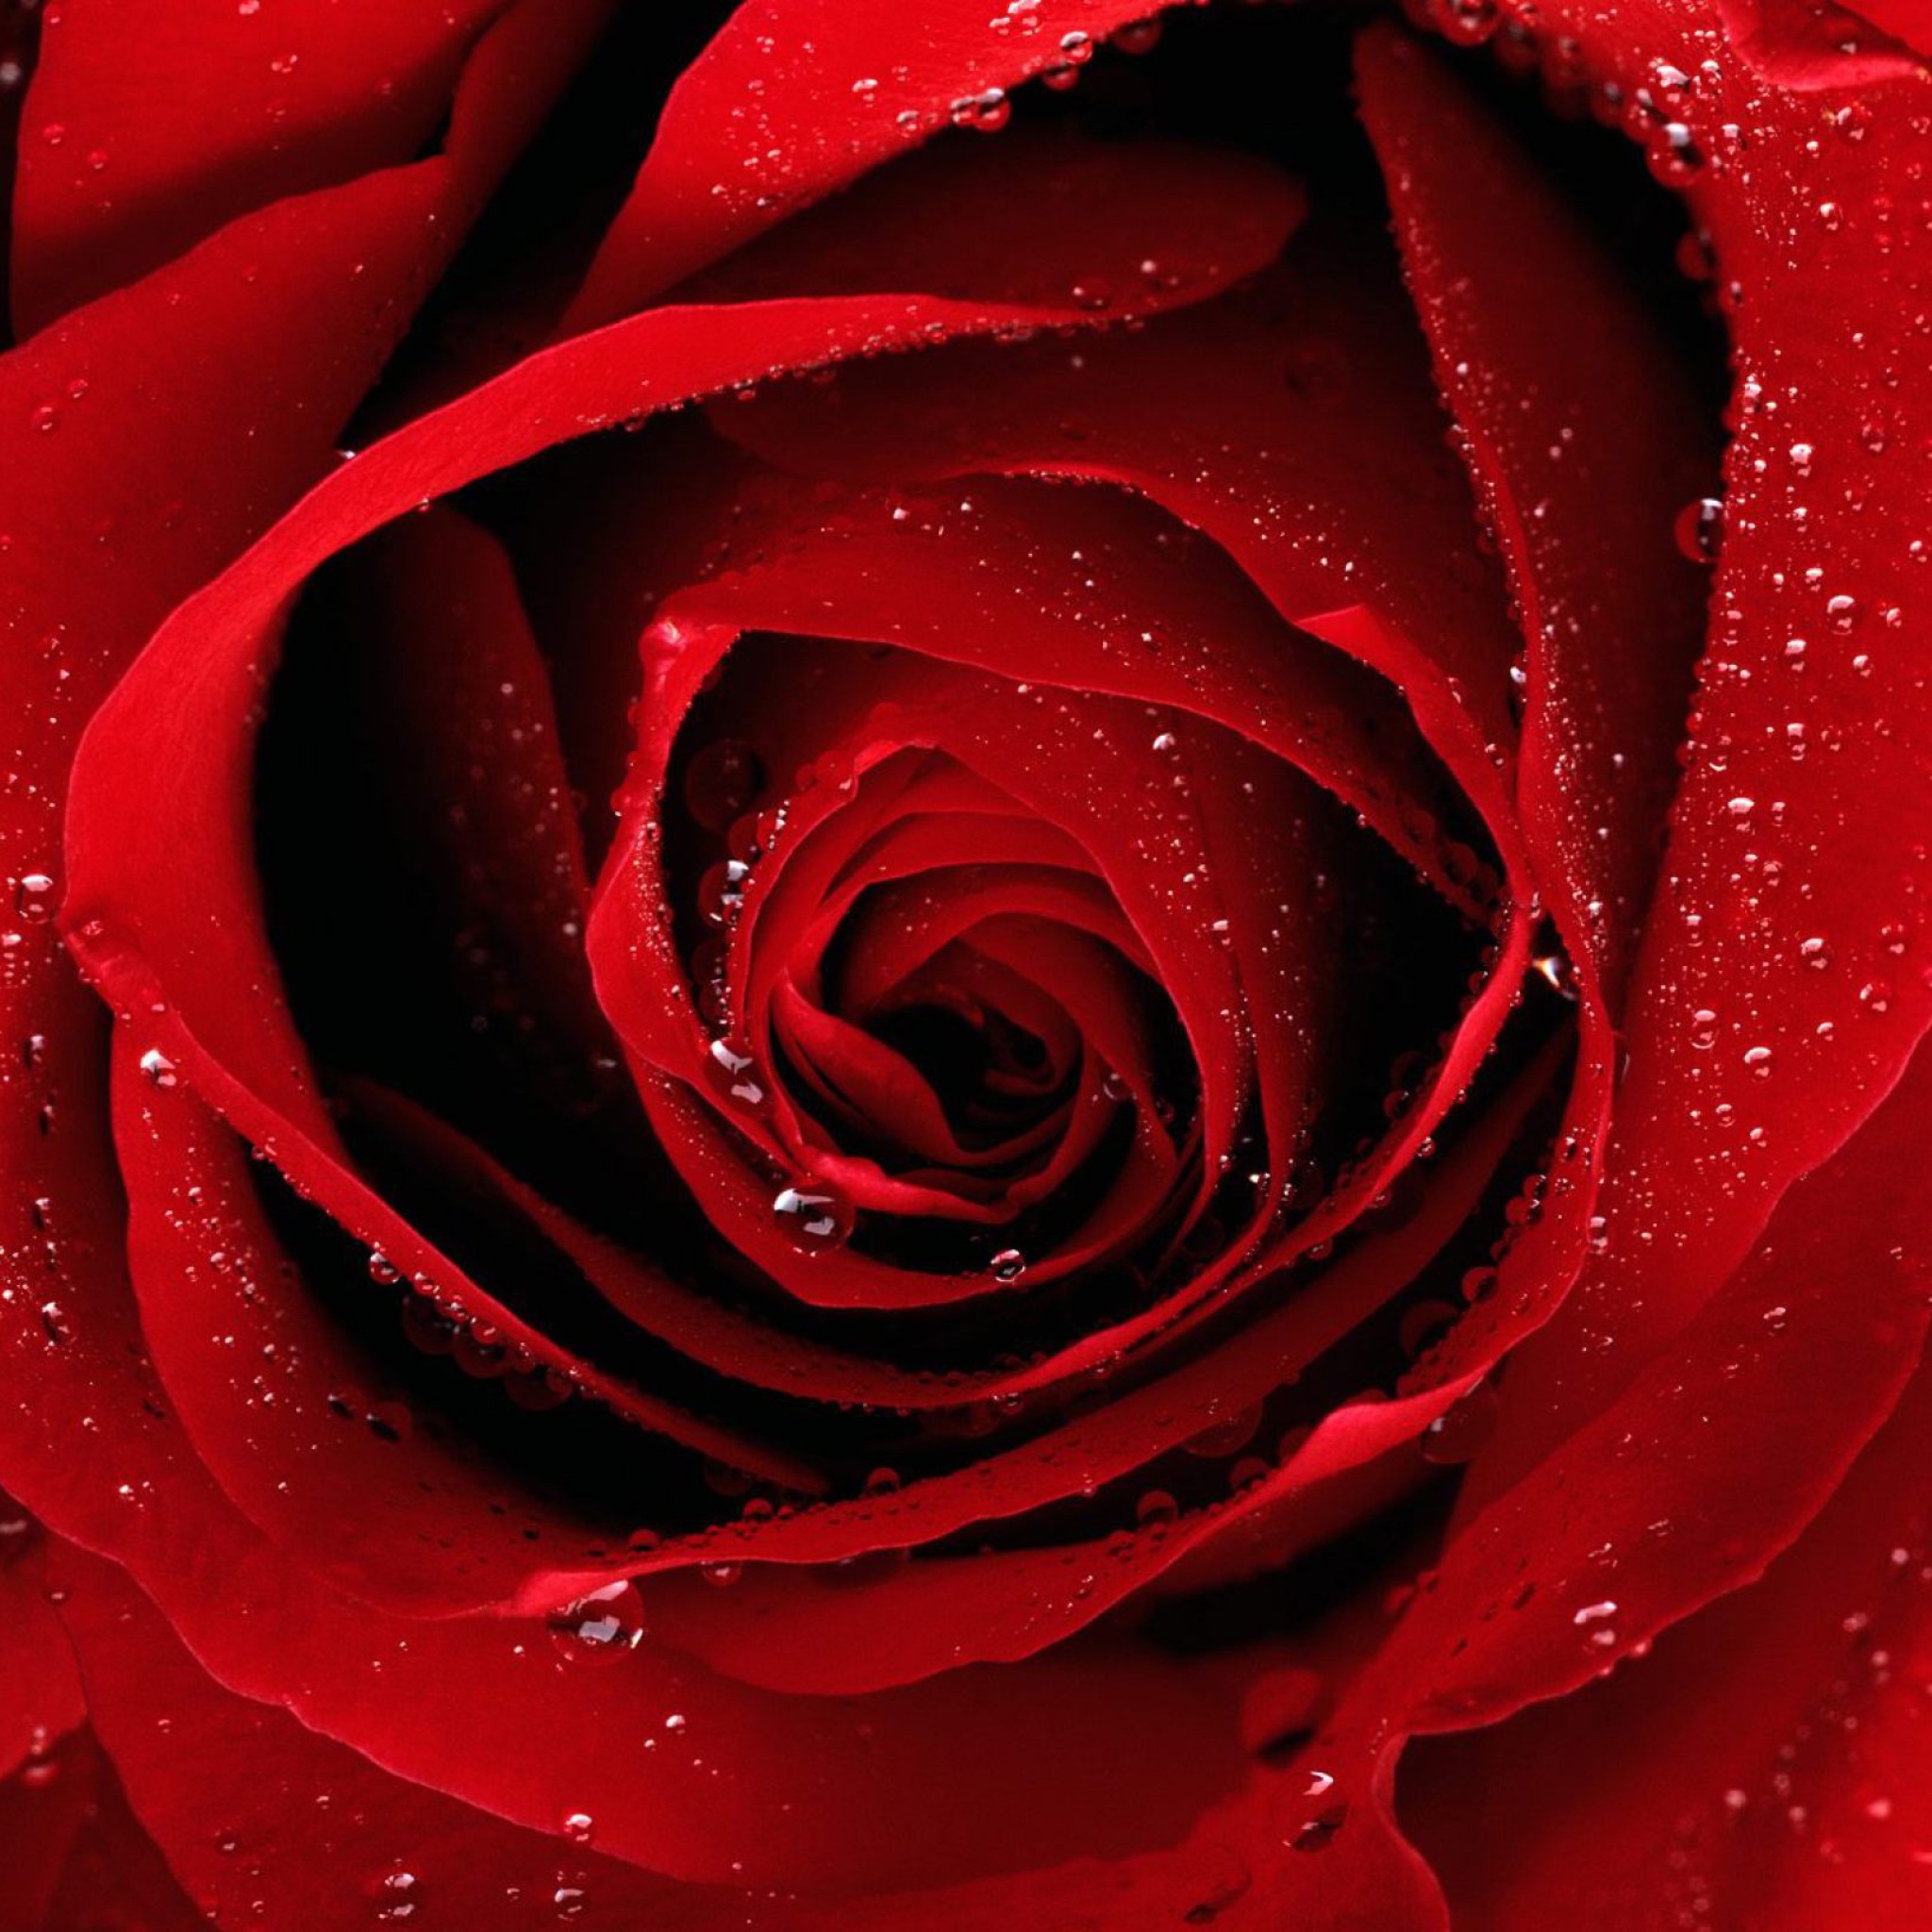 Sfondi Scarlet Rose With Water Drops 2048x2048